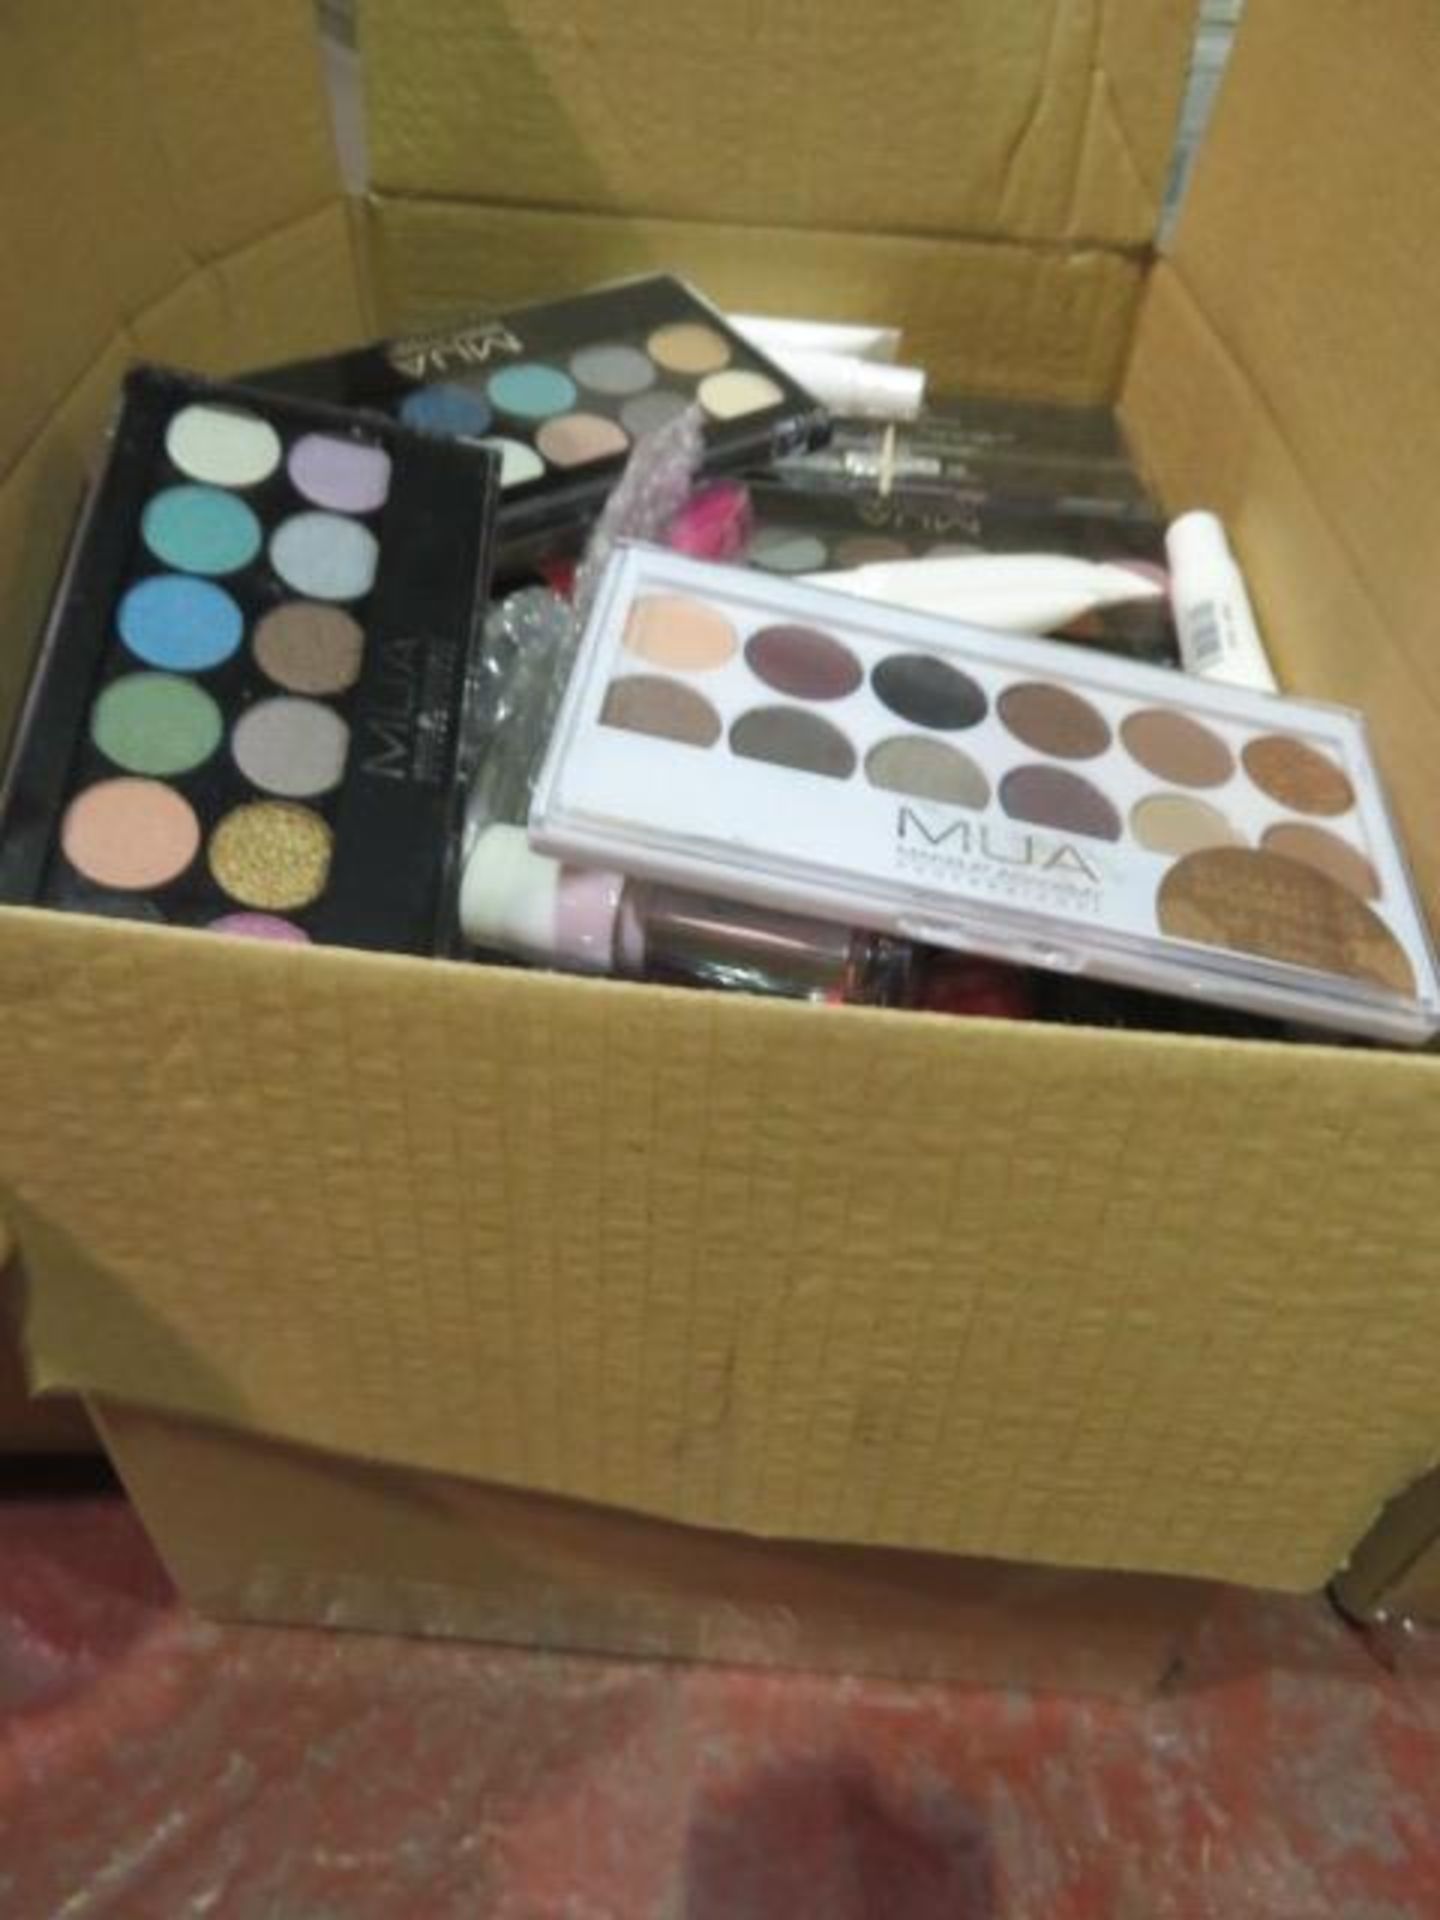 (Z151) Circa. 200 items of various new make up acadamy make up to include: skin primer, glitter... - Image 2 of 2